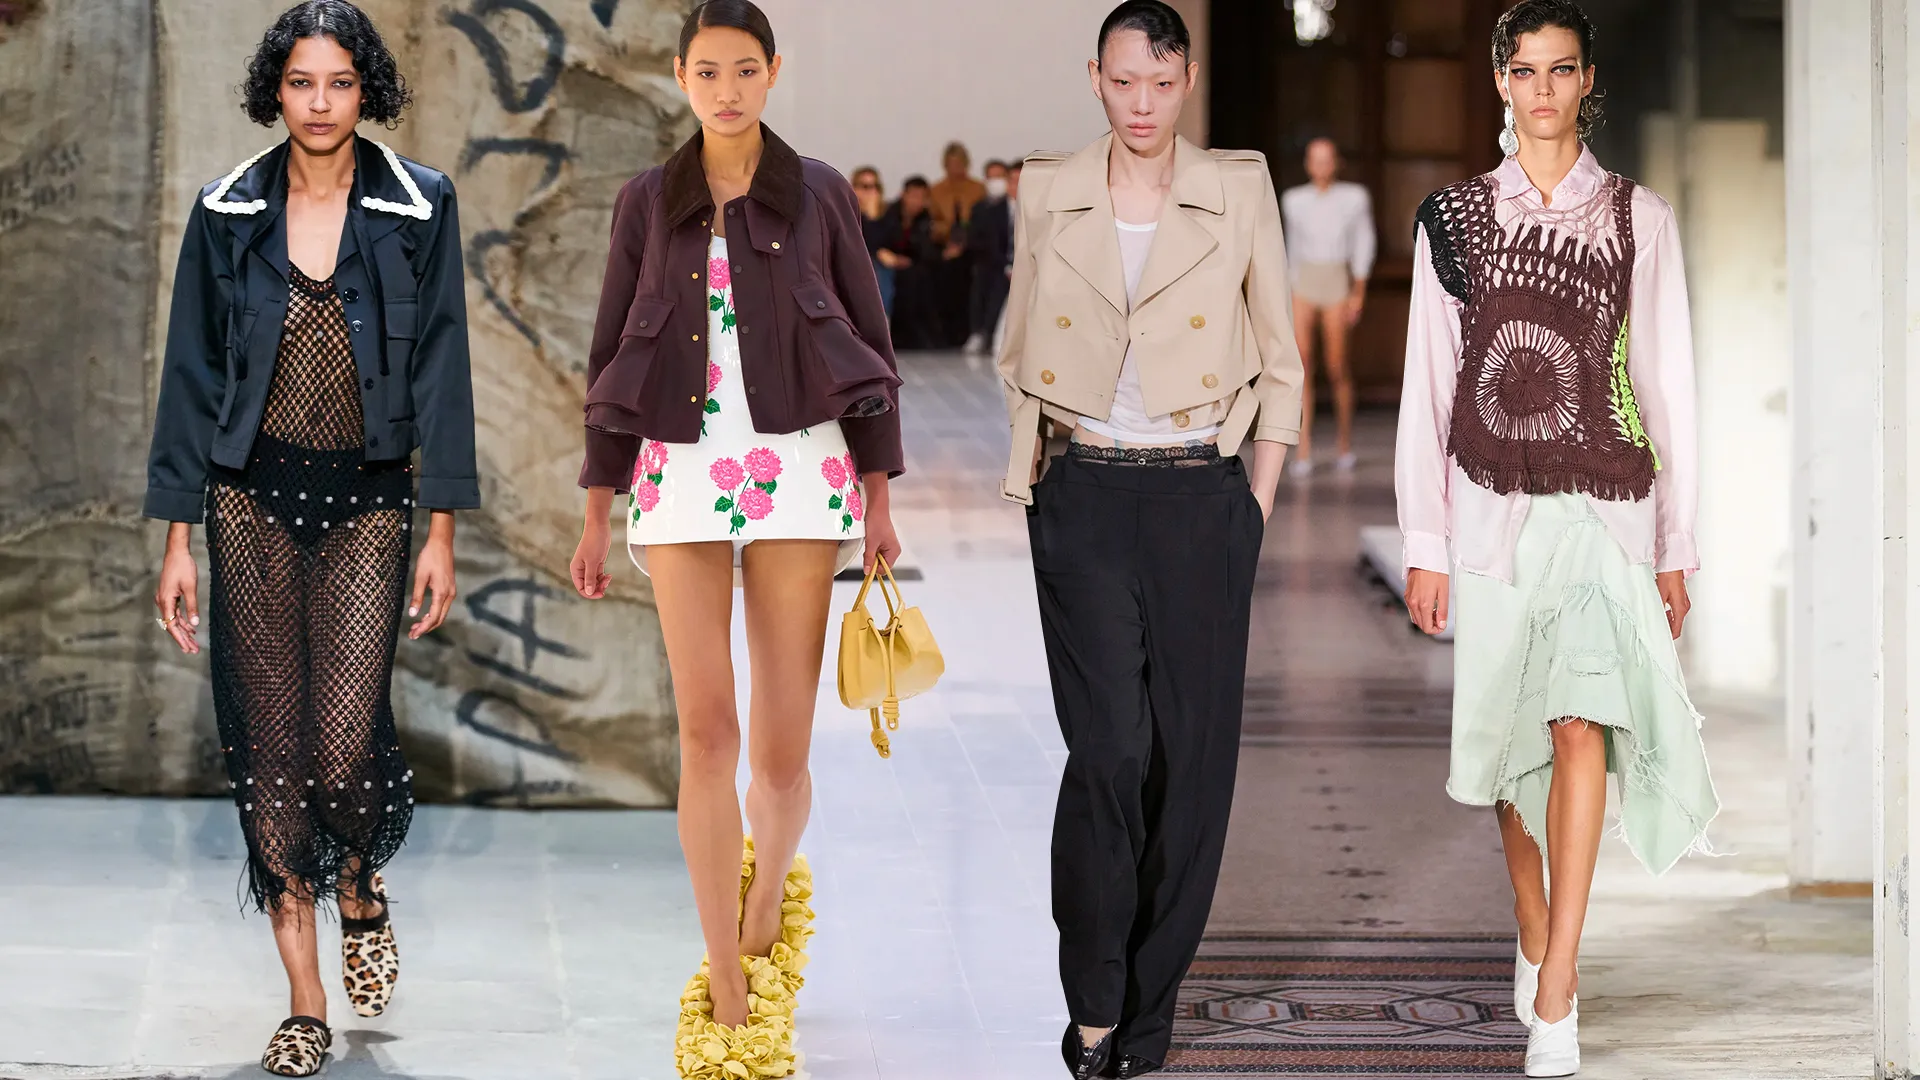 Breaking Down the Top Trends from This Year's Fashion Week